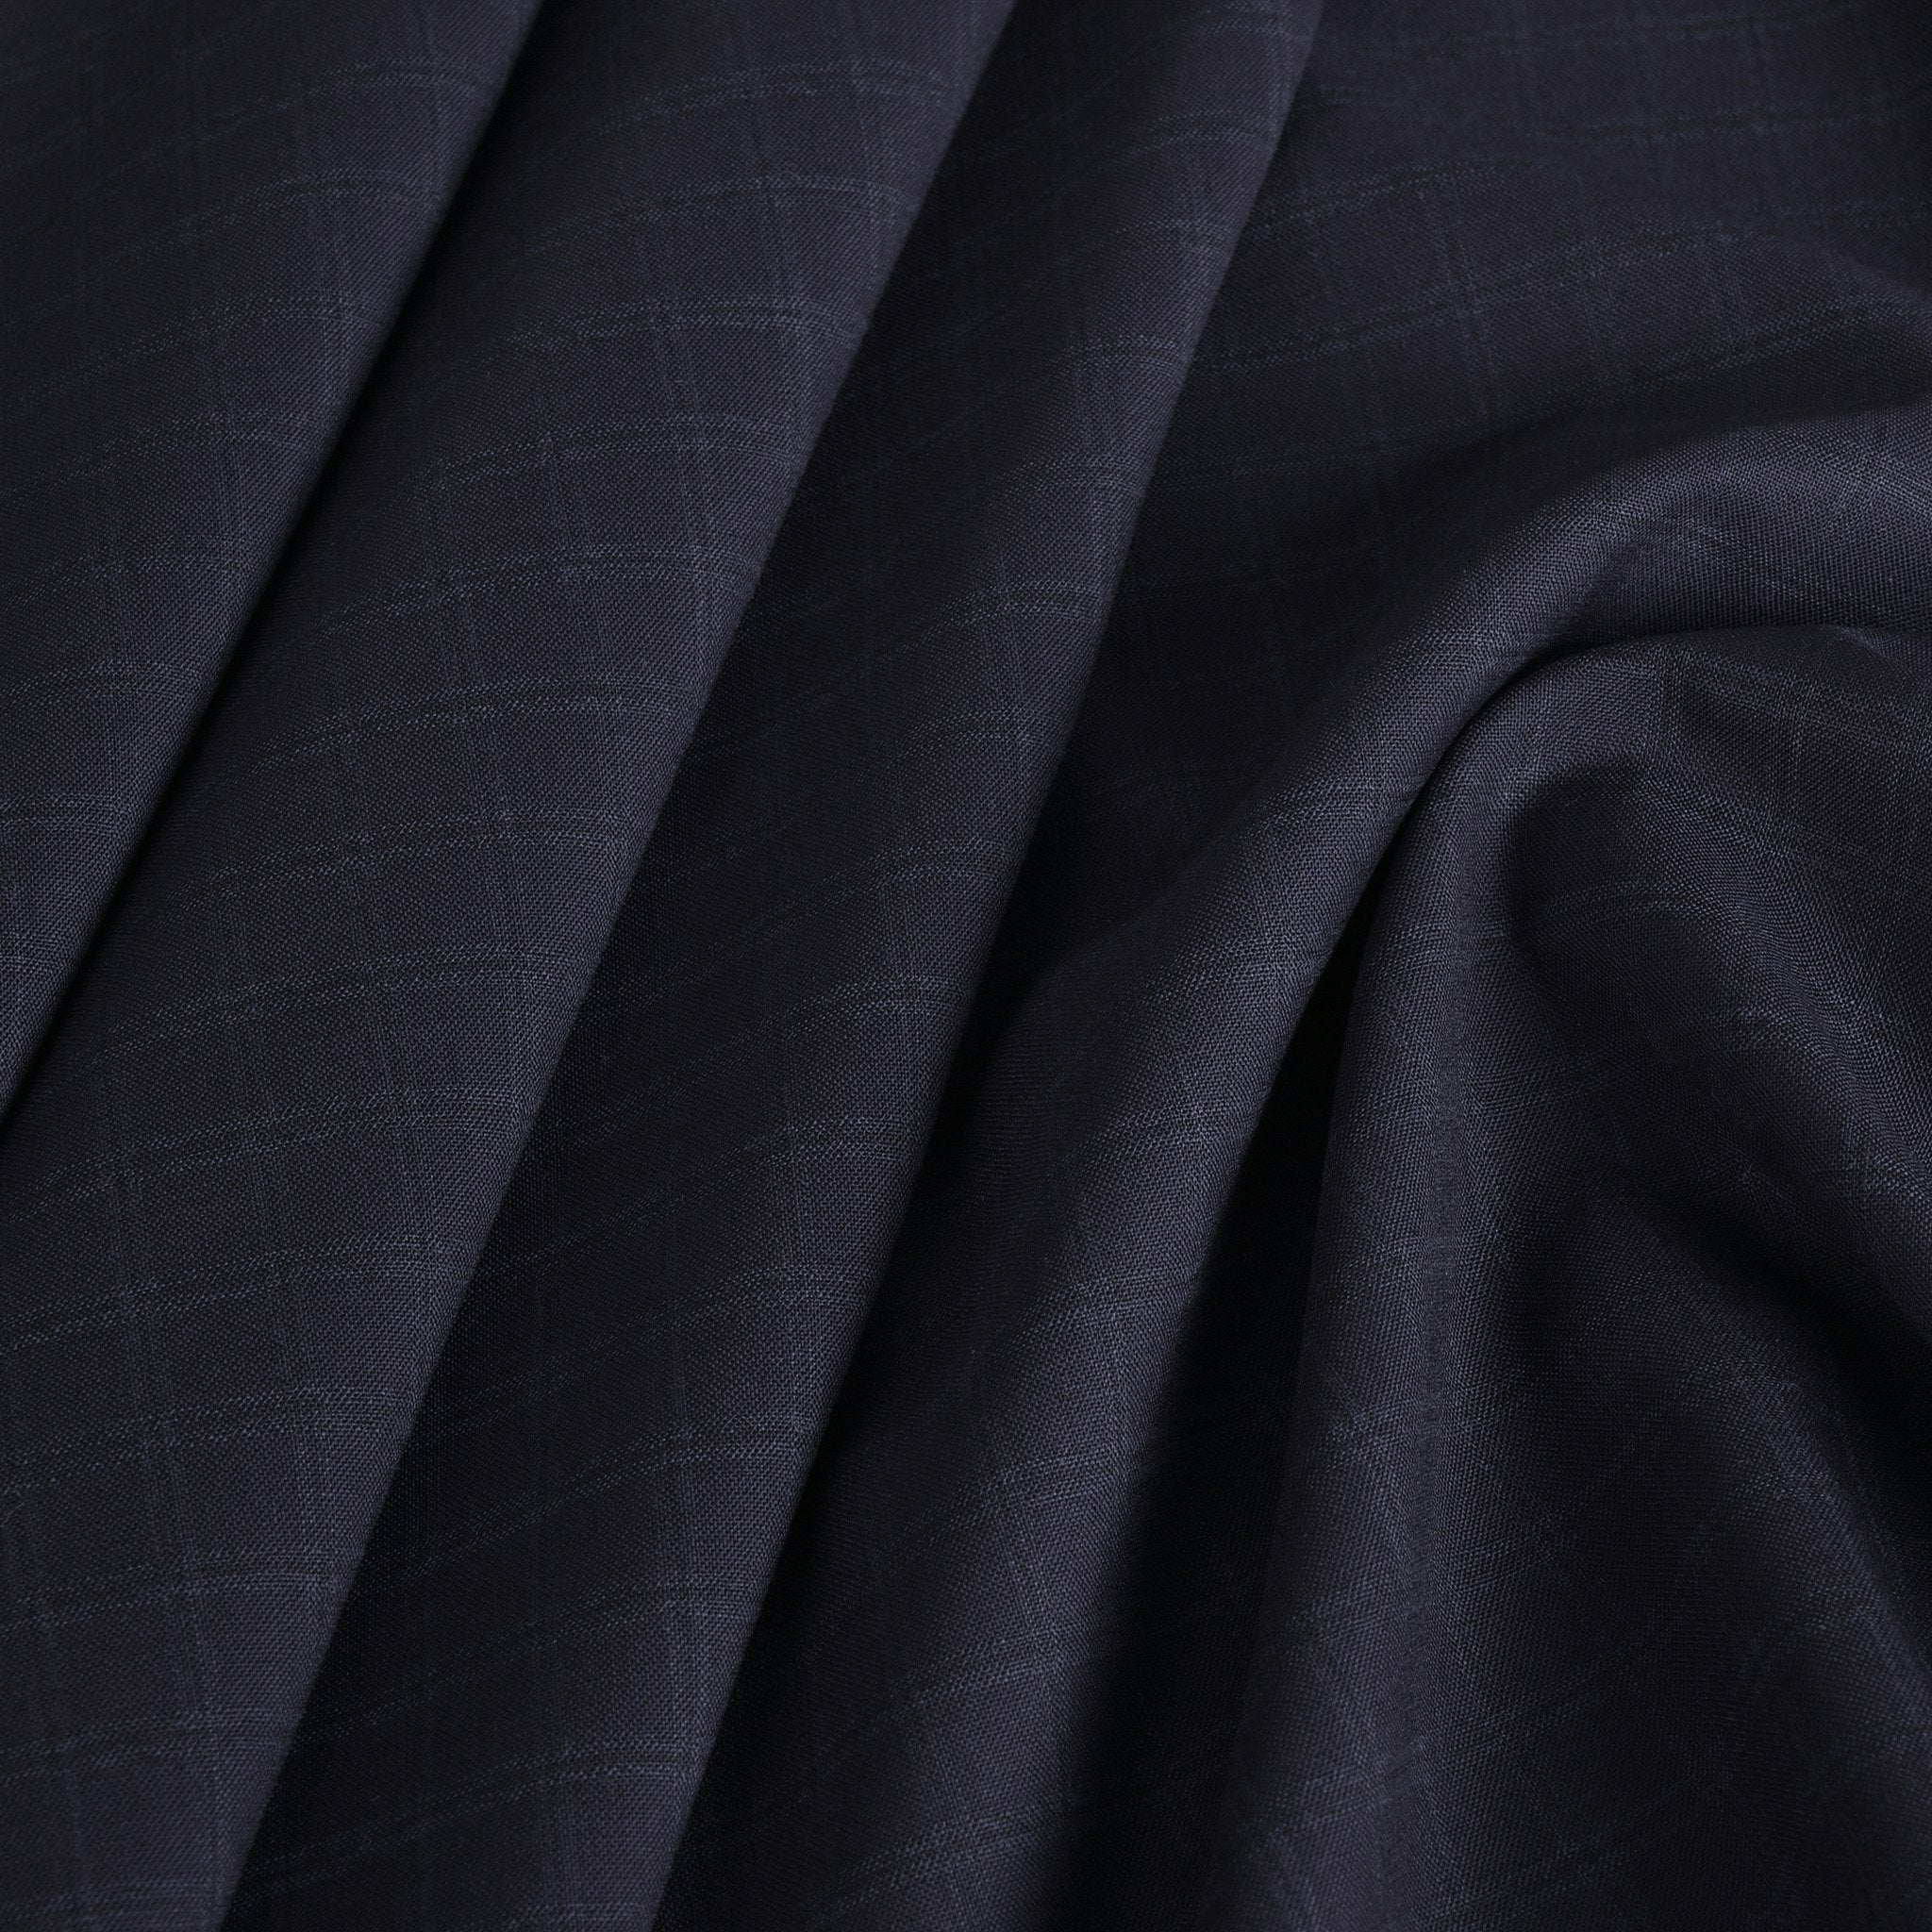 Navy Suiting Check Fabric 4253